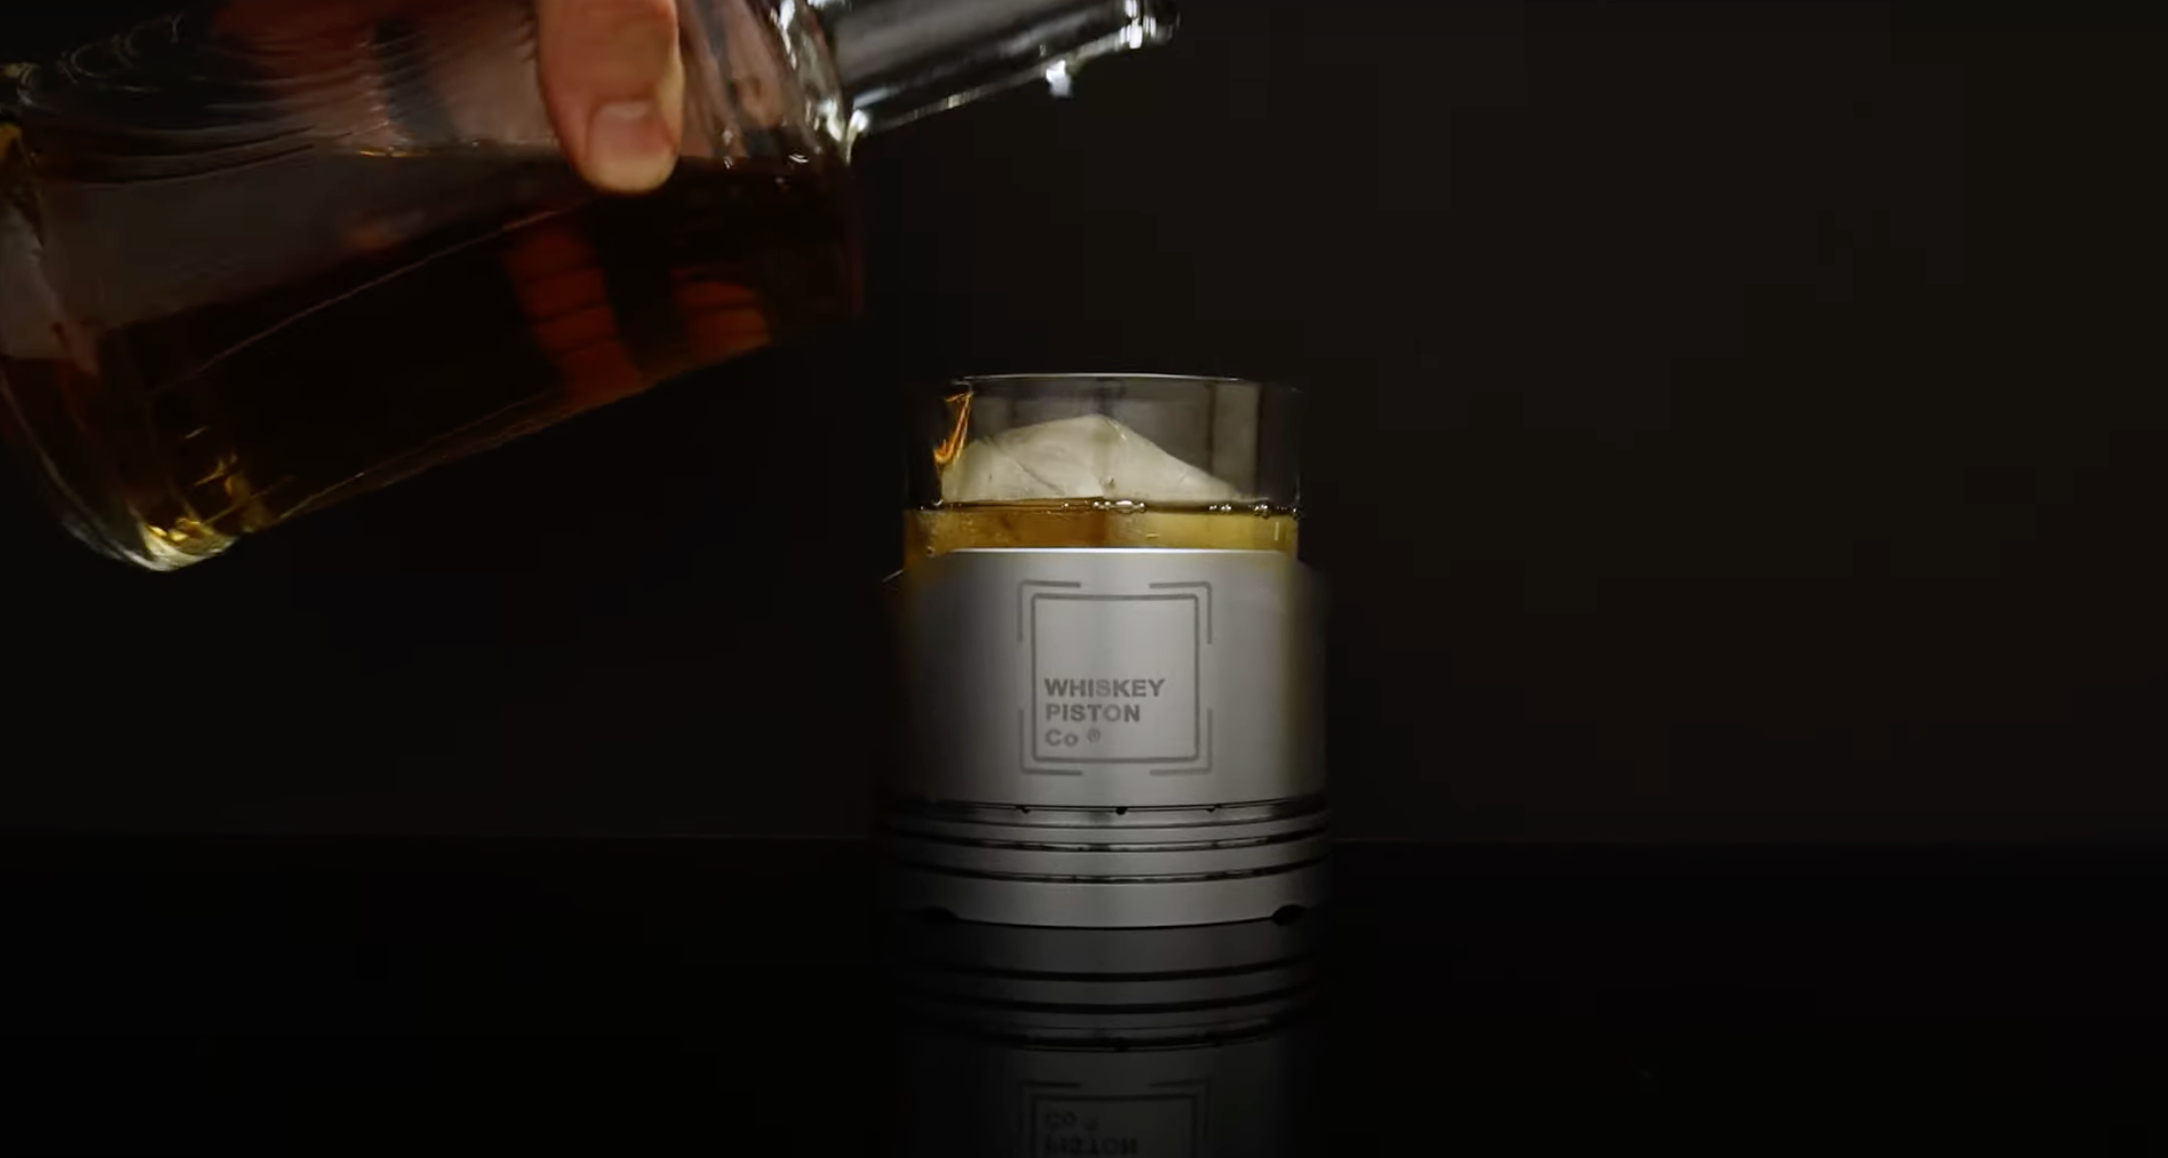 Load video: YB 9.0:1 Whiskey Tumbler Promotional Video